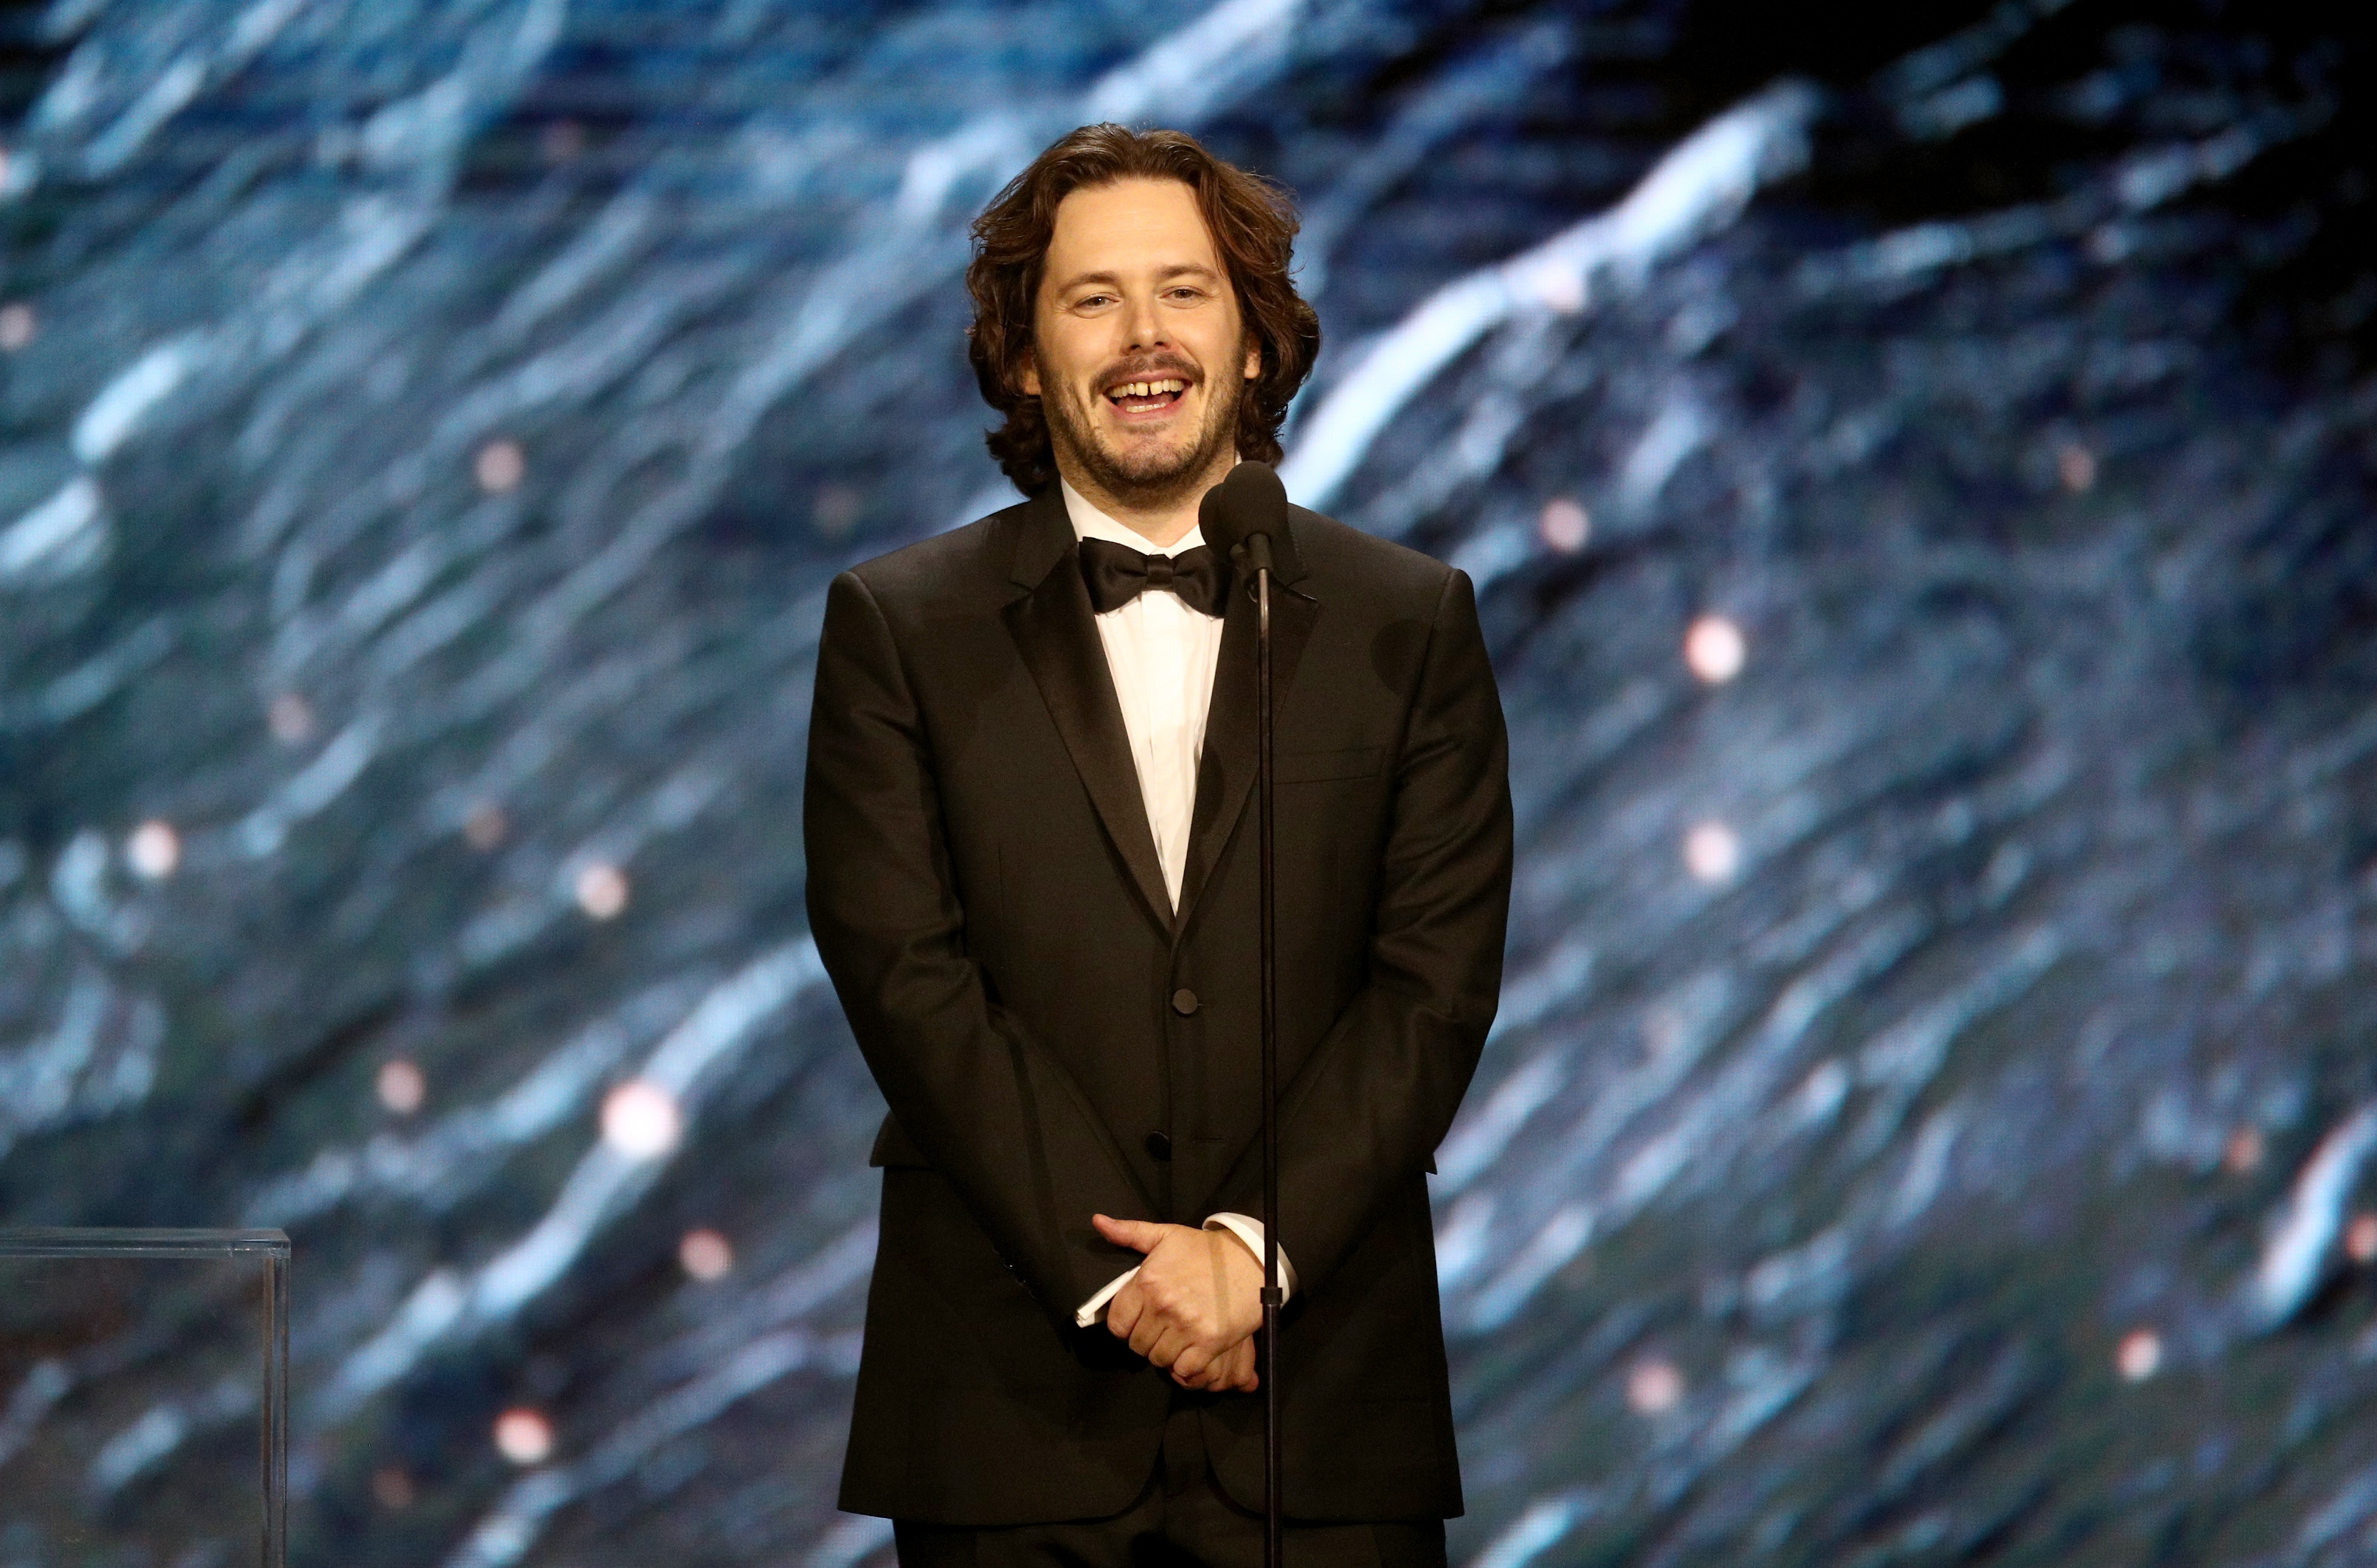 Edgar Wright in a suit and bow tie presenting an award.